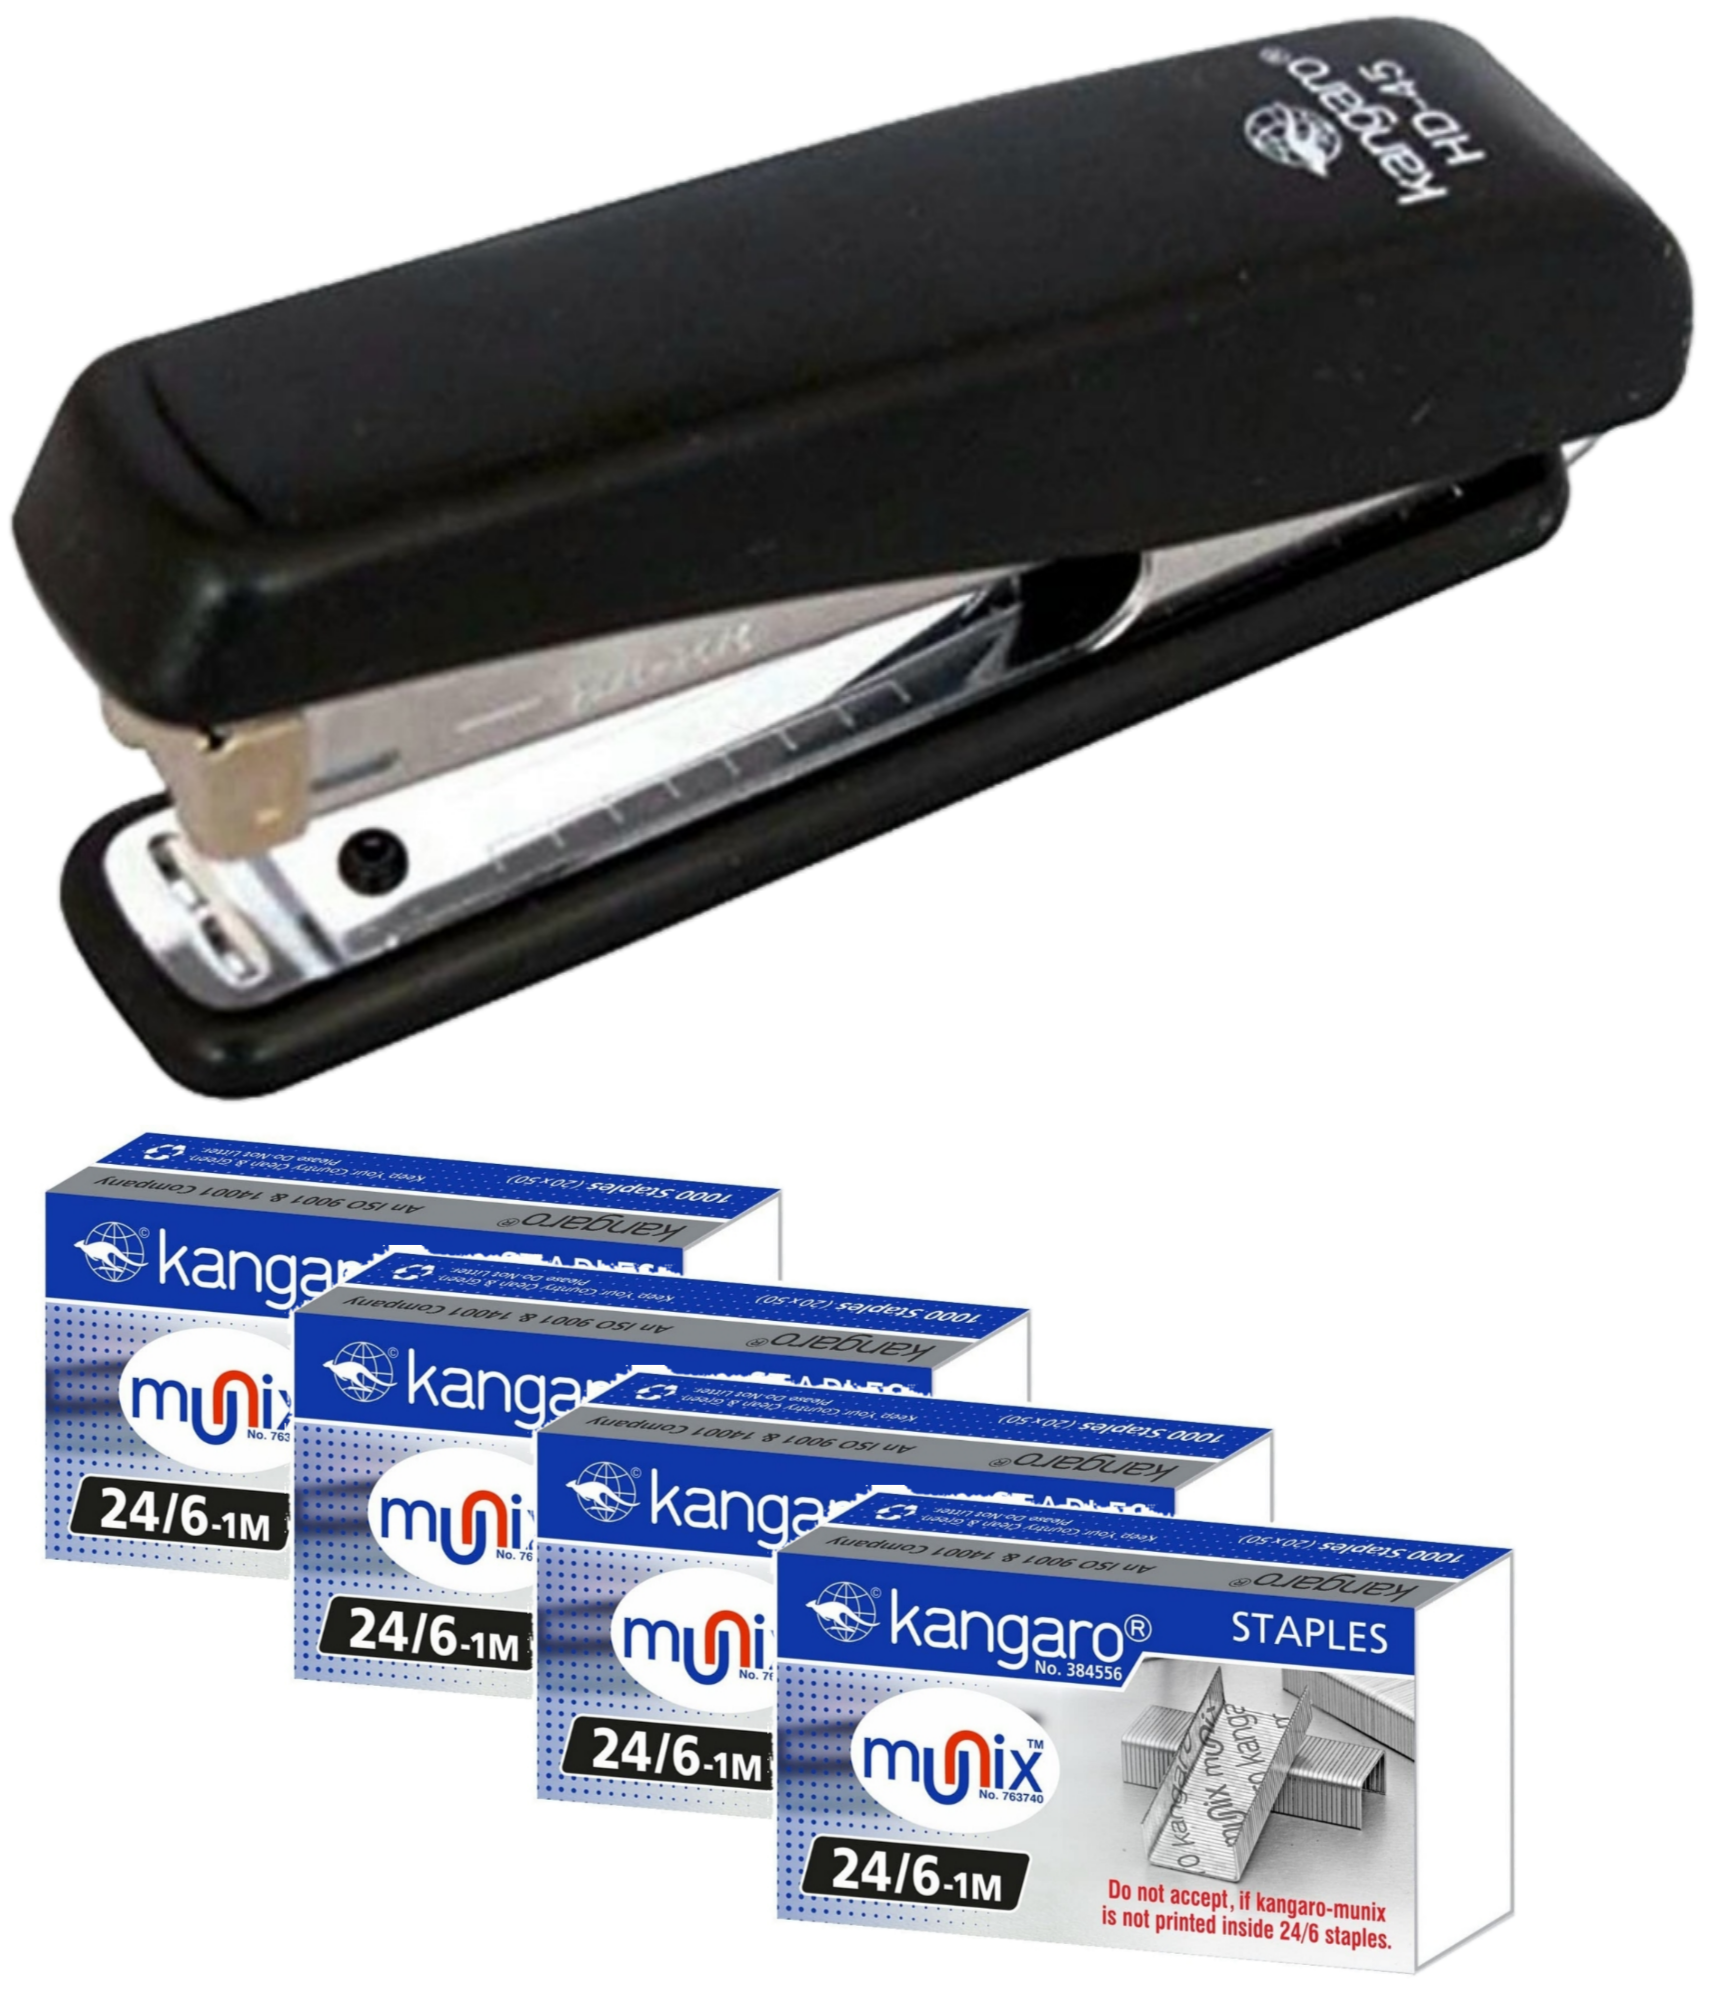 Kangaro HD-45 Stapler With 4 Packets of Staple Pin 24/6-1M Heavy Duty Steel Component With Plastic Body Combo Pack